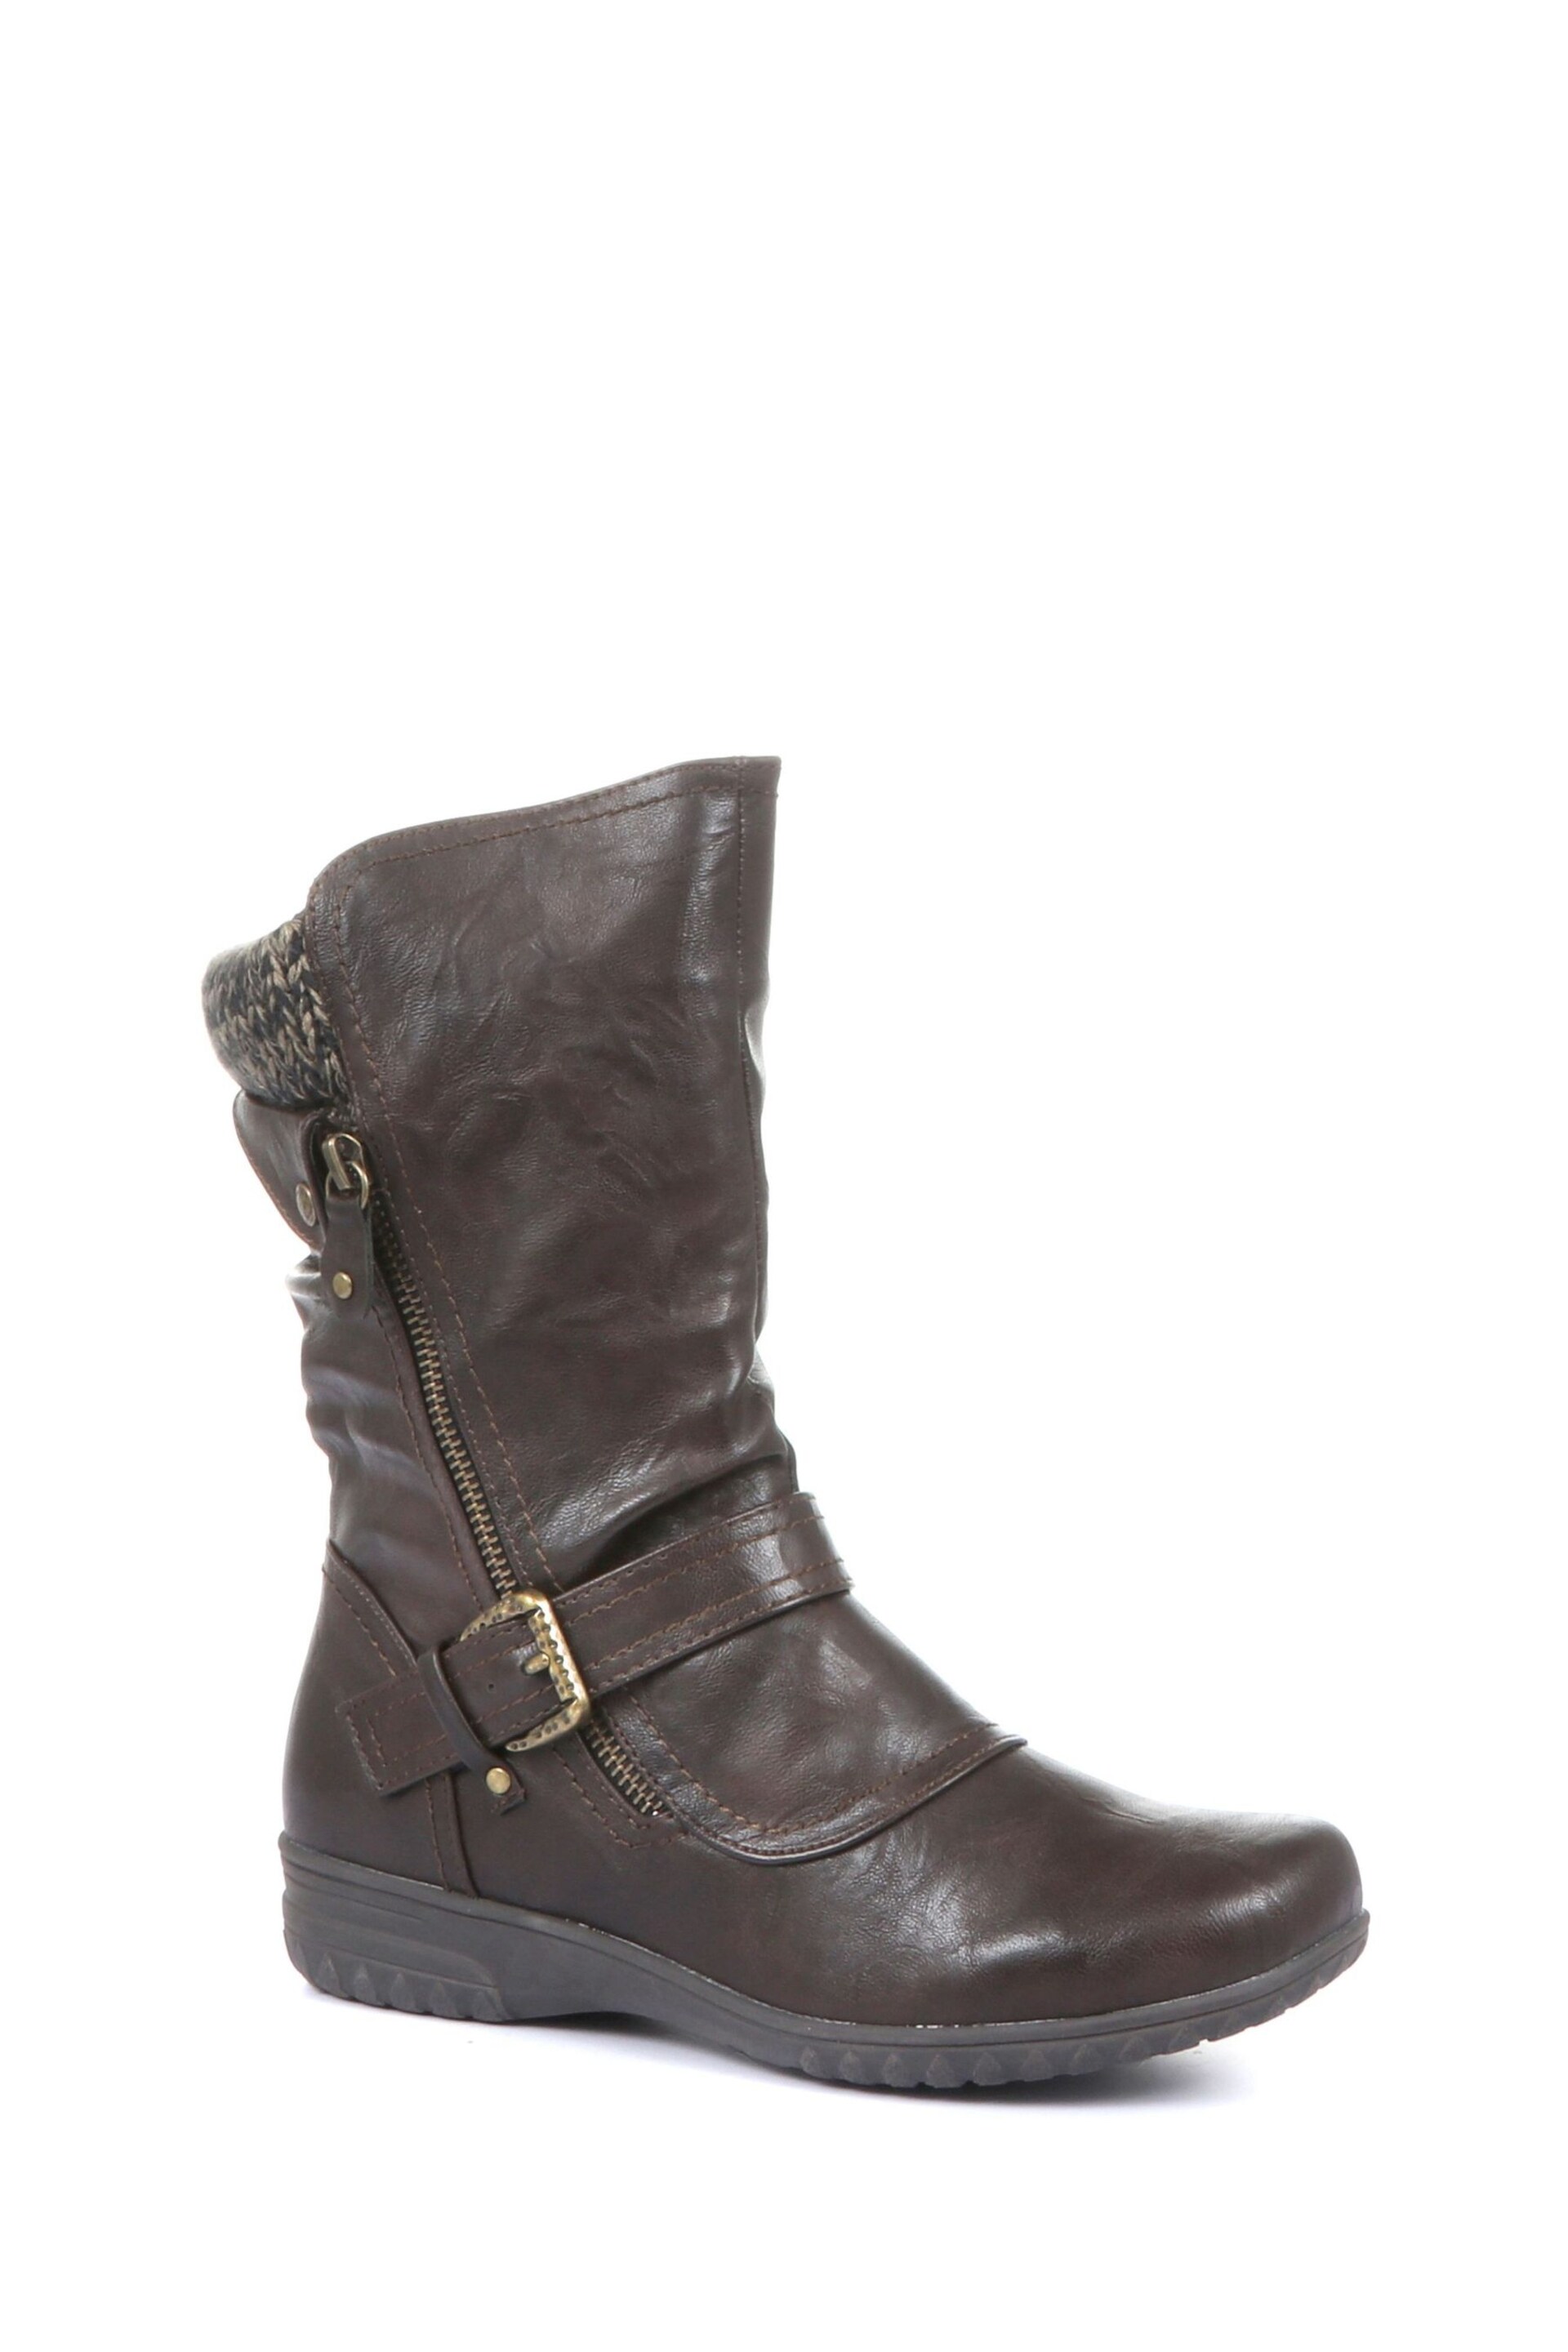 Pavers Ladies Calf Boots - Image 3 of 5